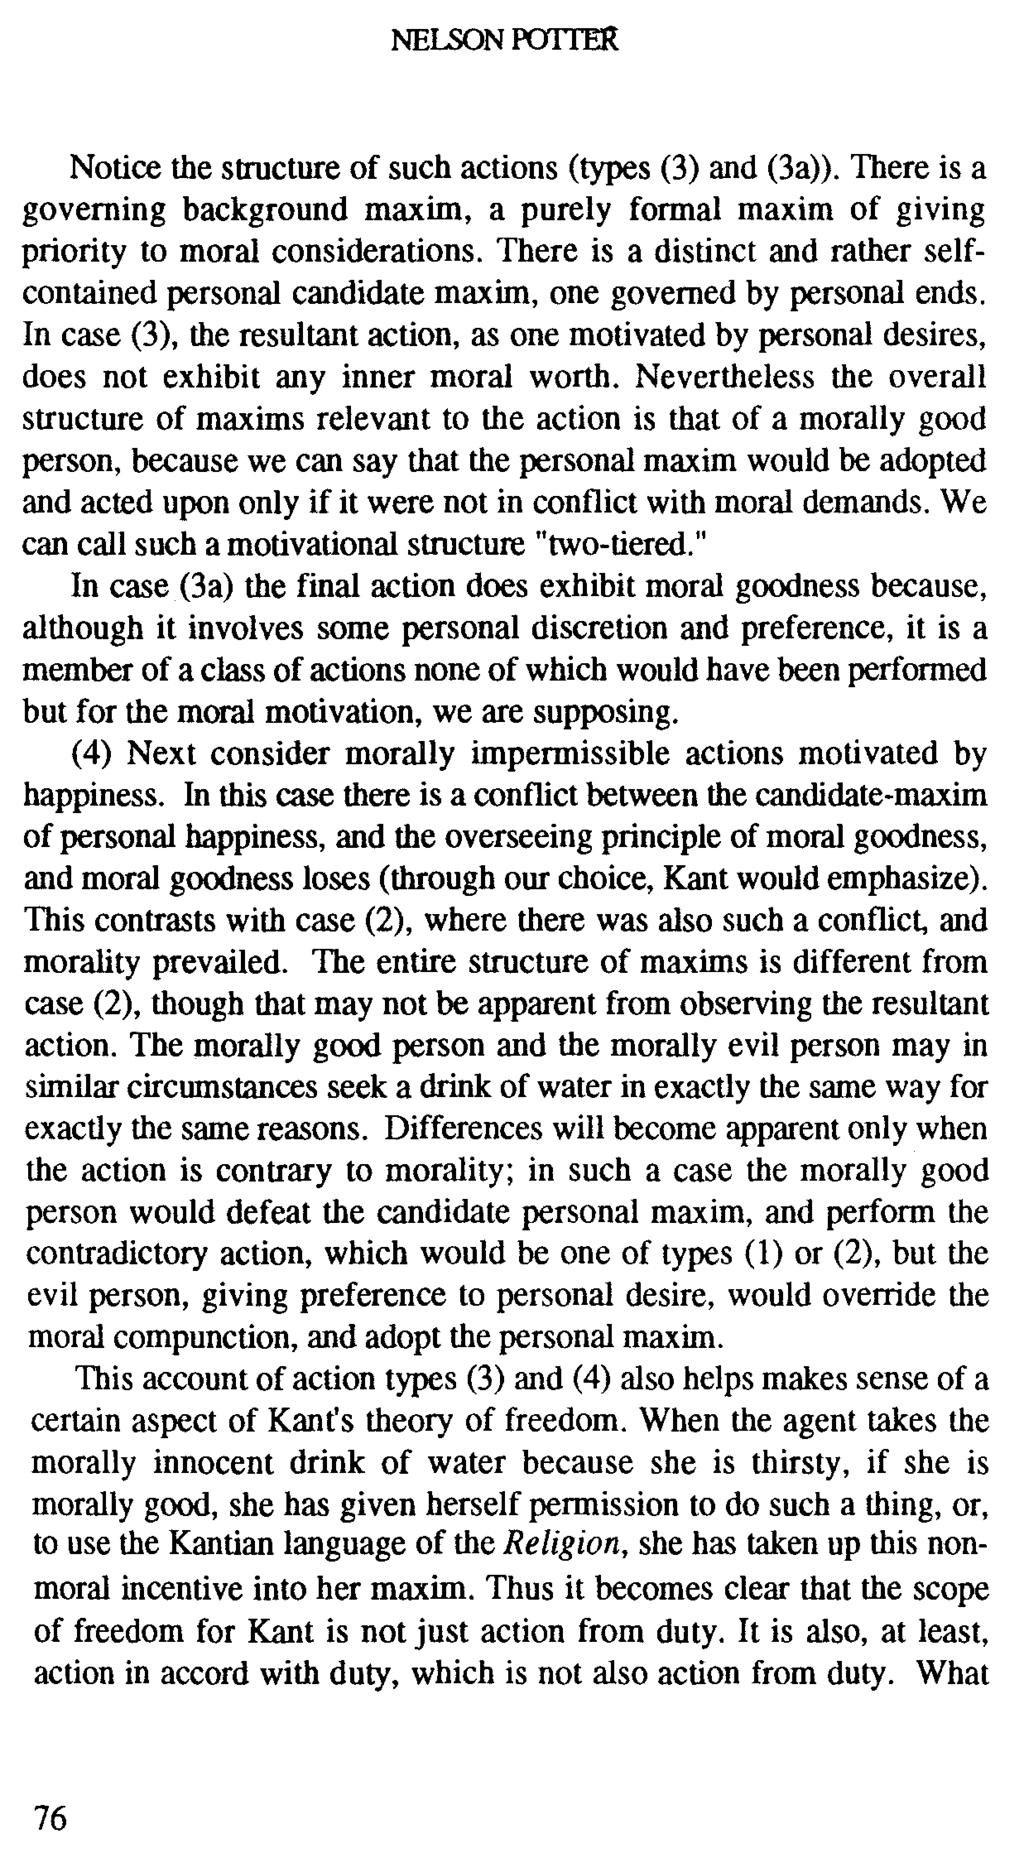 NELSON POTI'ER Notice the structure of such actions (types (3) and (3a». There is a governing background maxim, a purely formal maxim of giving priority to moral considerations.